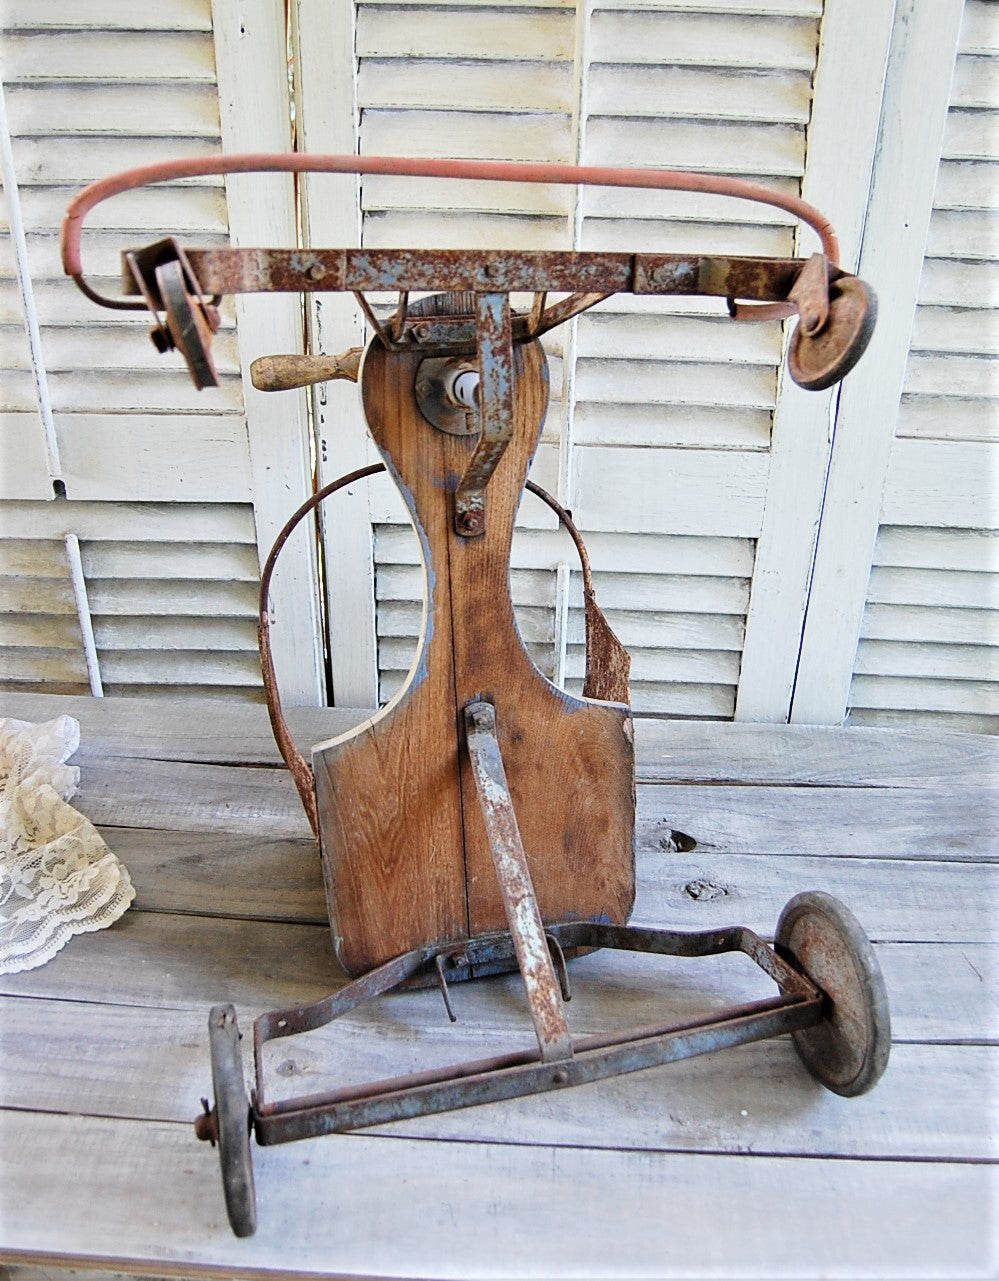 Antique ride-on toy